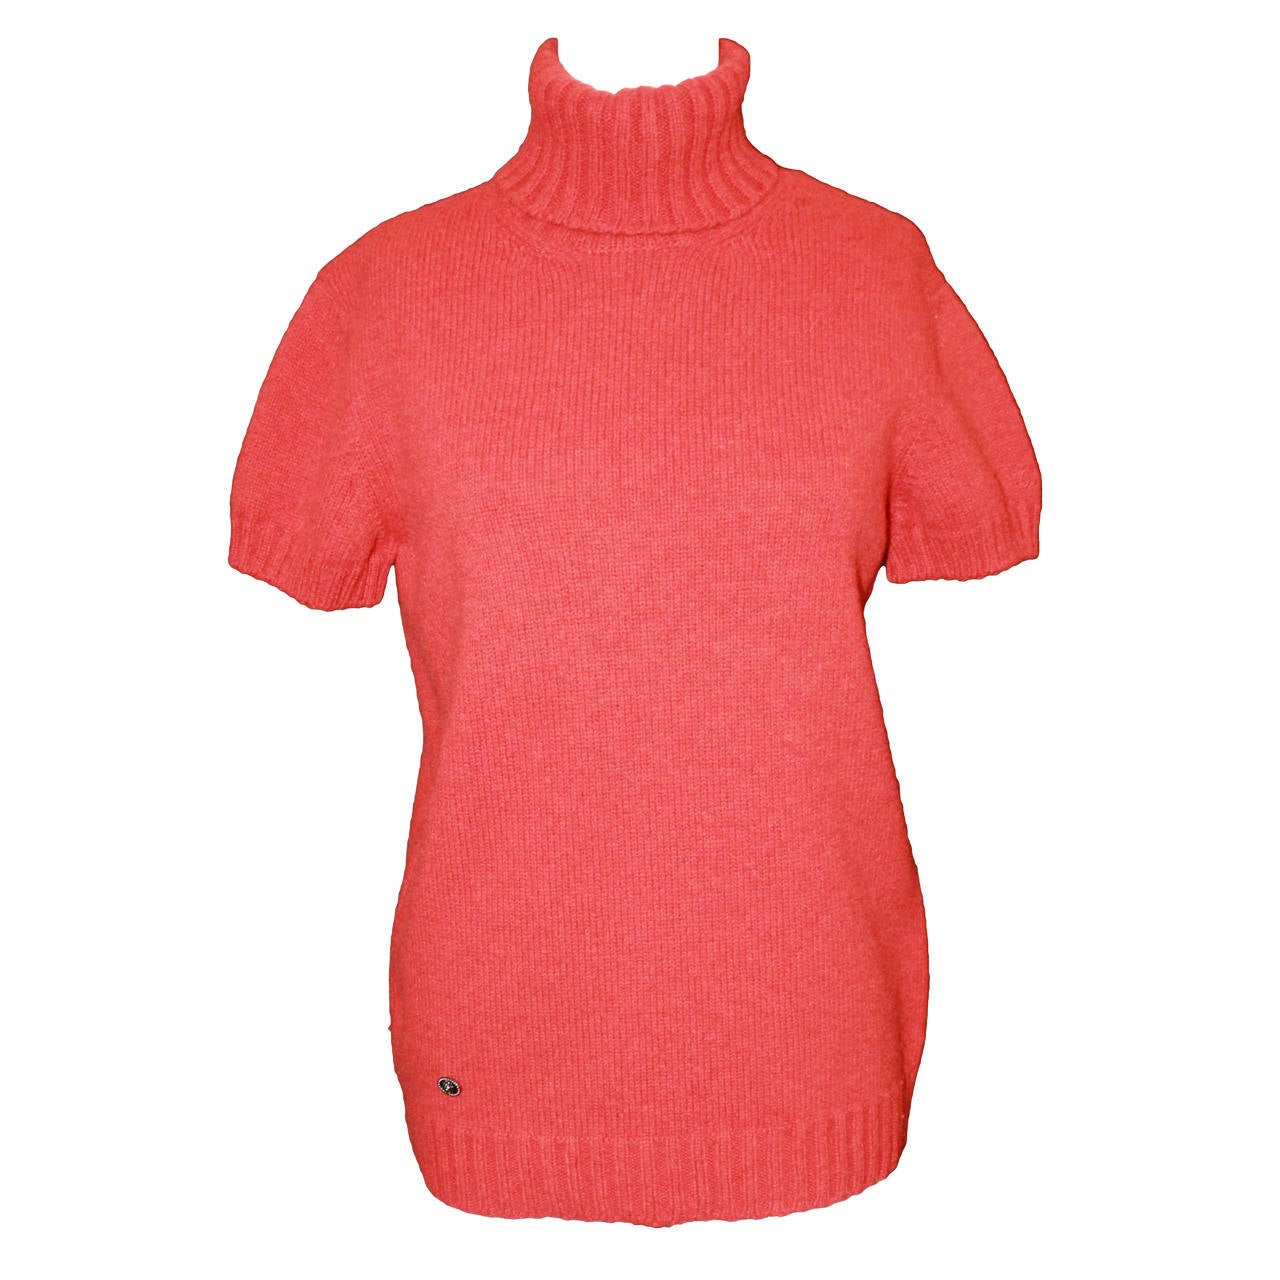 Chanel 1980s Red Wool Turtleneck Short Sleeve Sweater